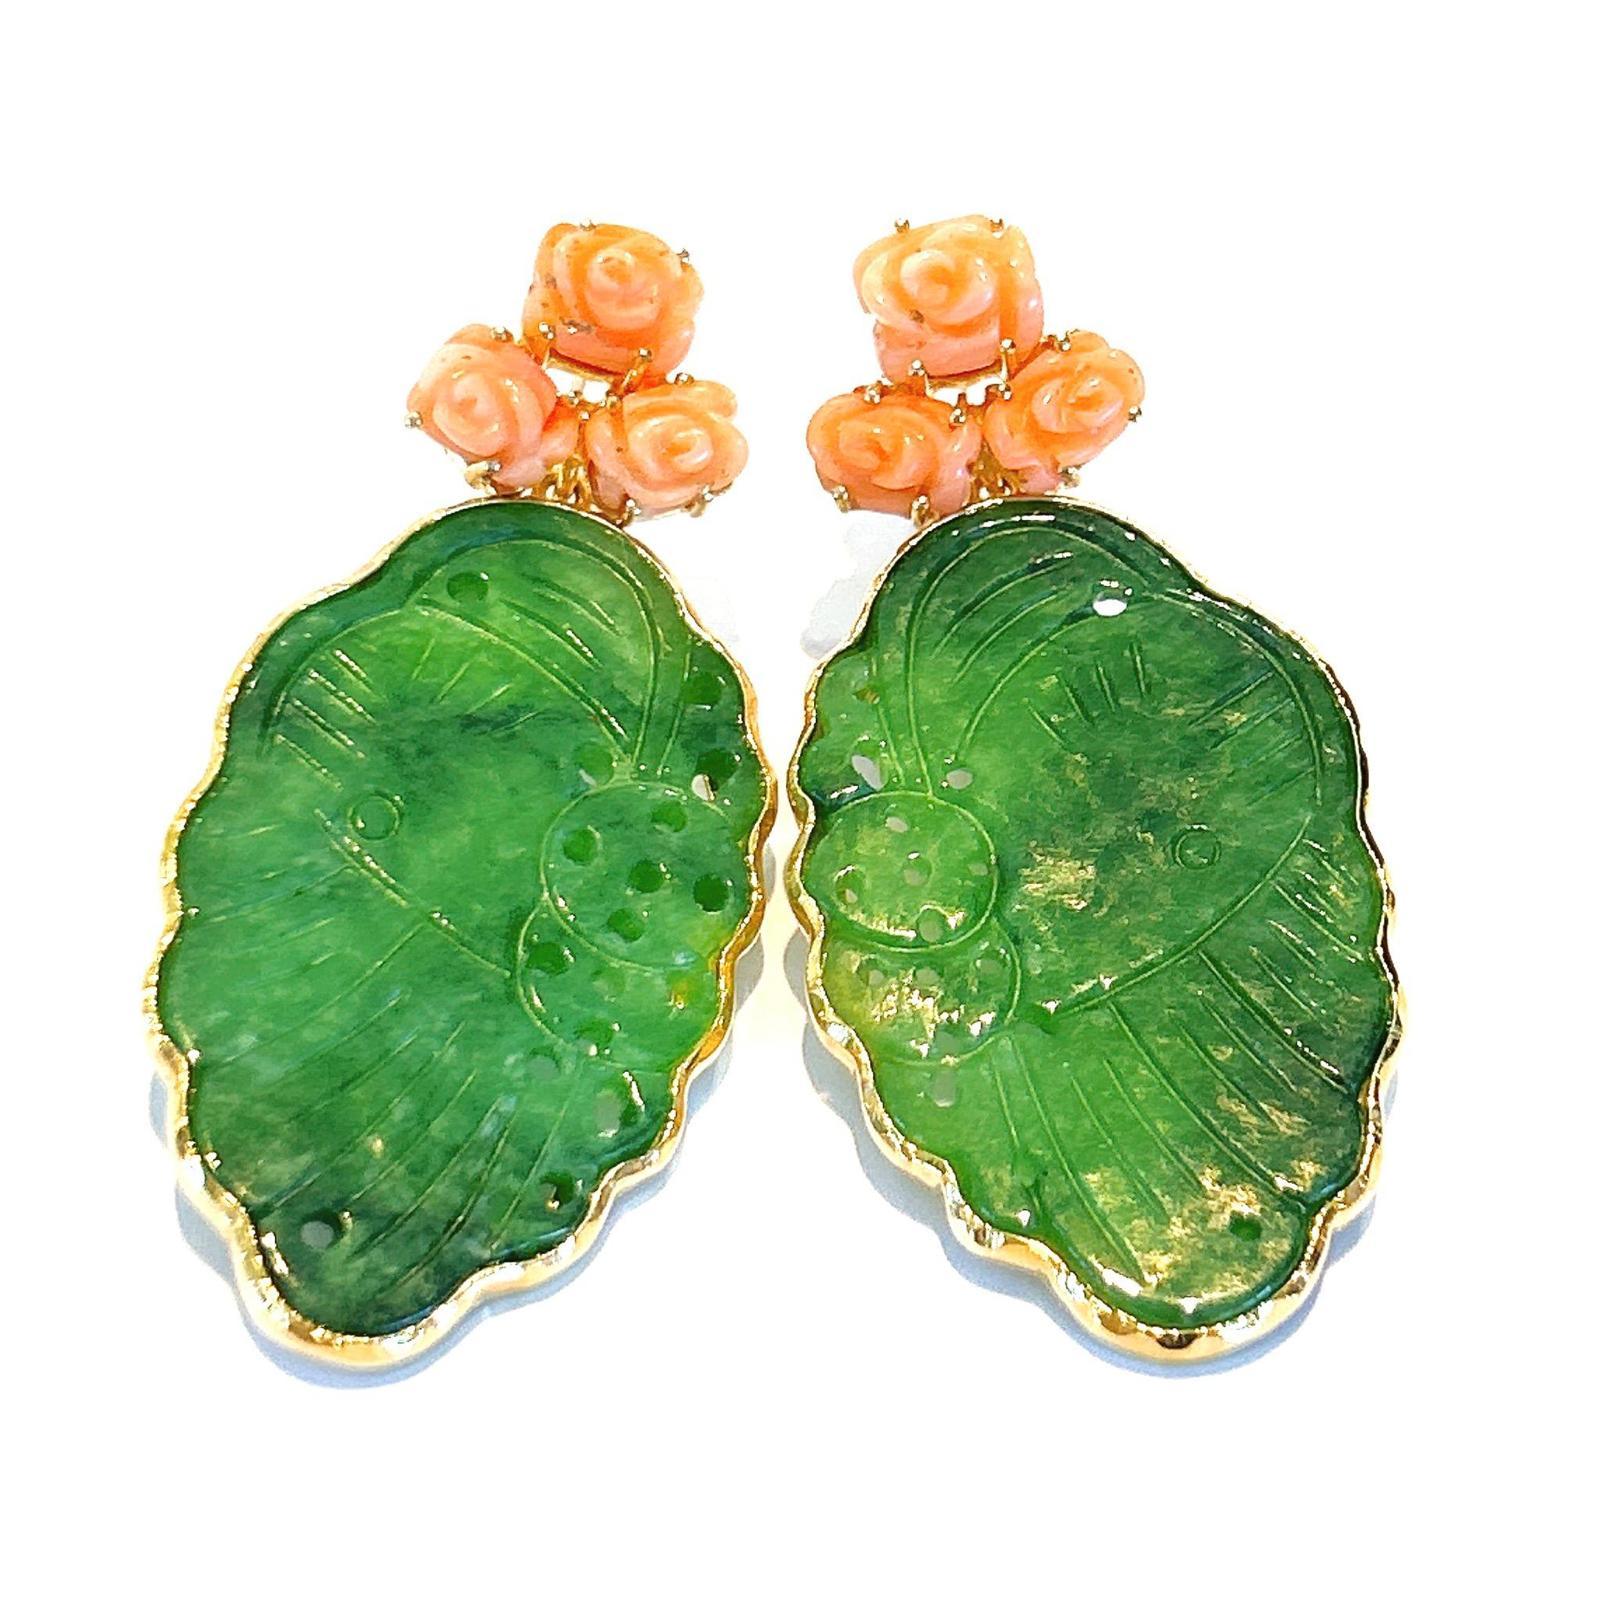 “Orient” Pink Coral & Green Jade Earrings Set in 18 K Gold & Silver In New Condition For Sale In New York, NY